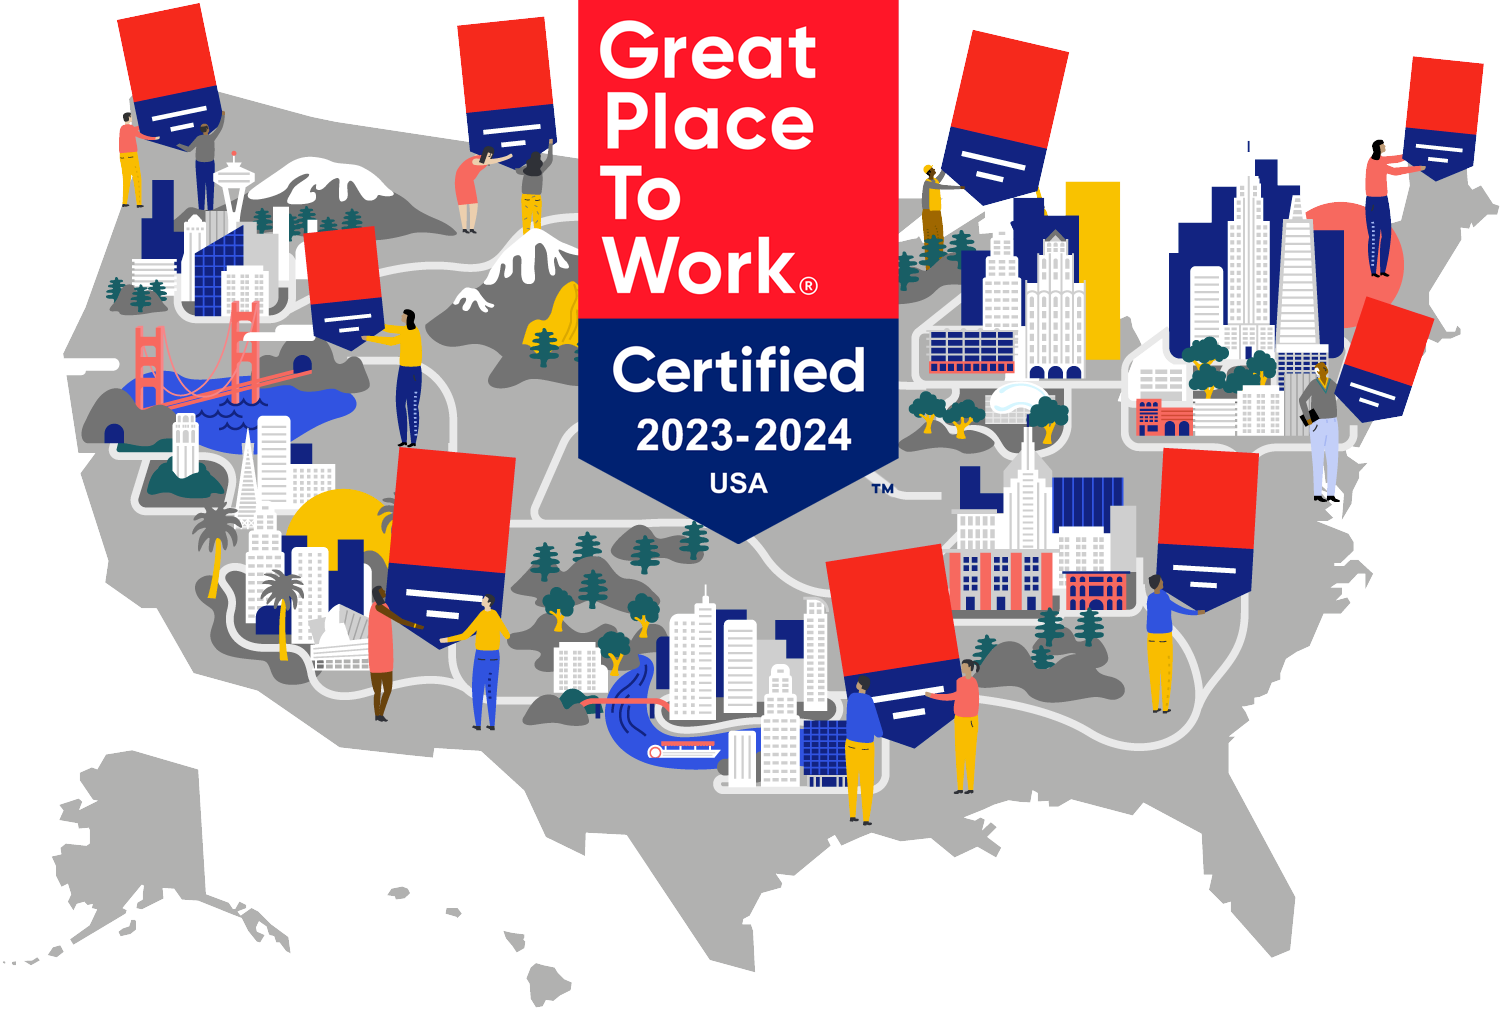 Great place to work map